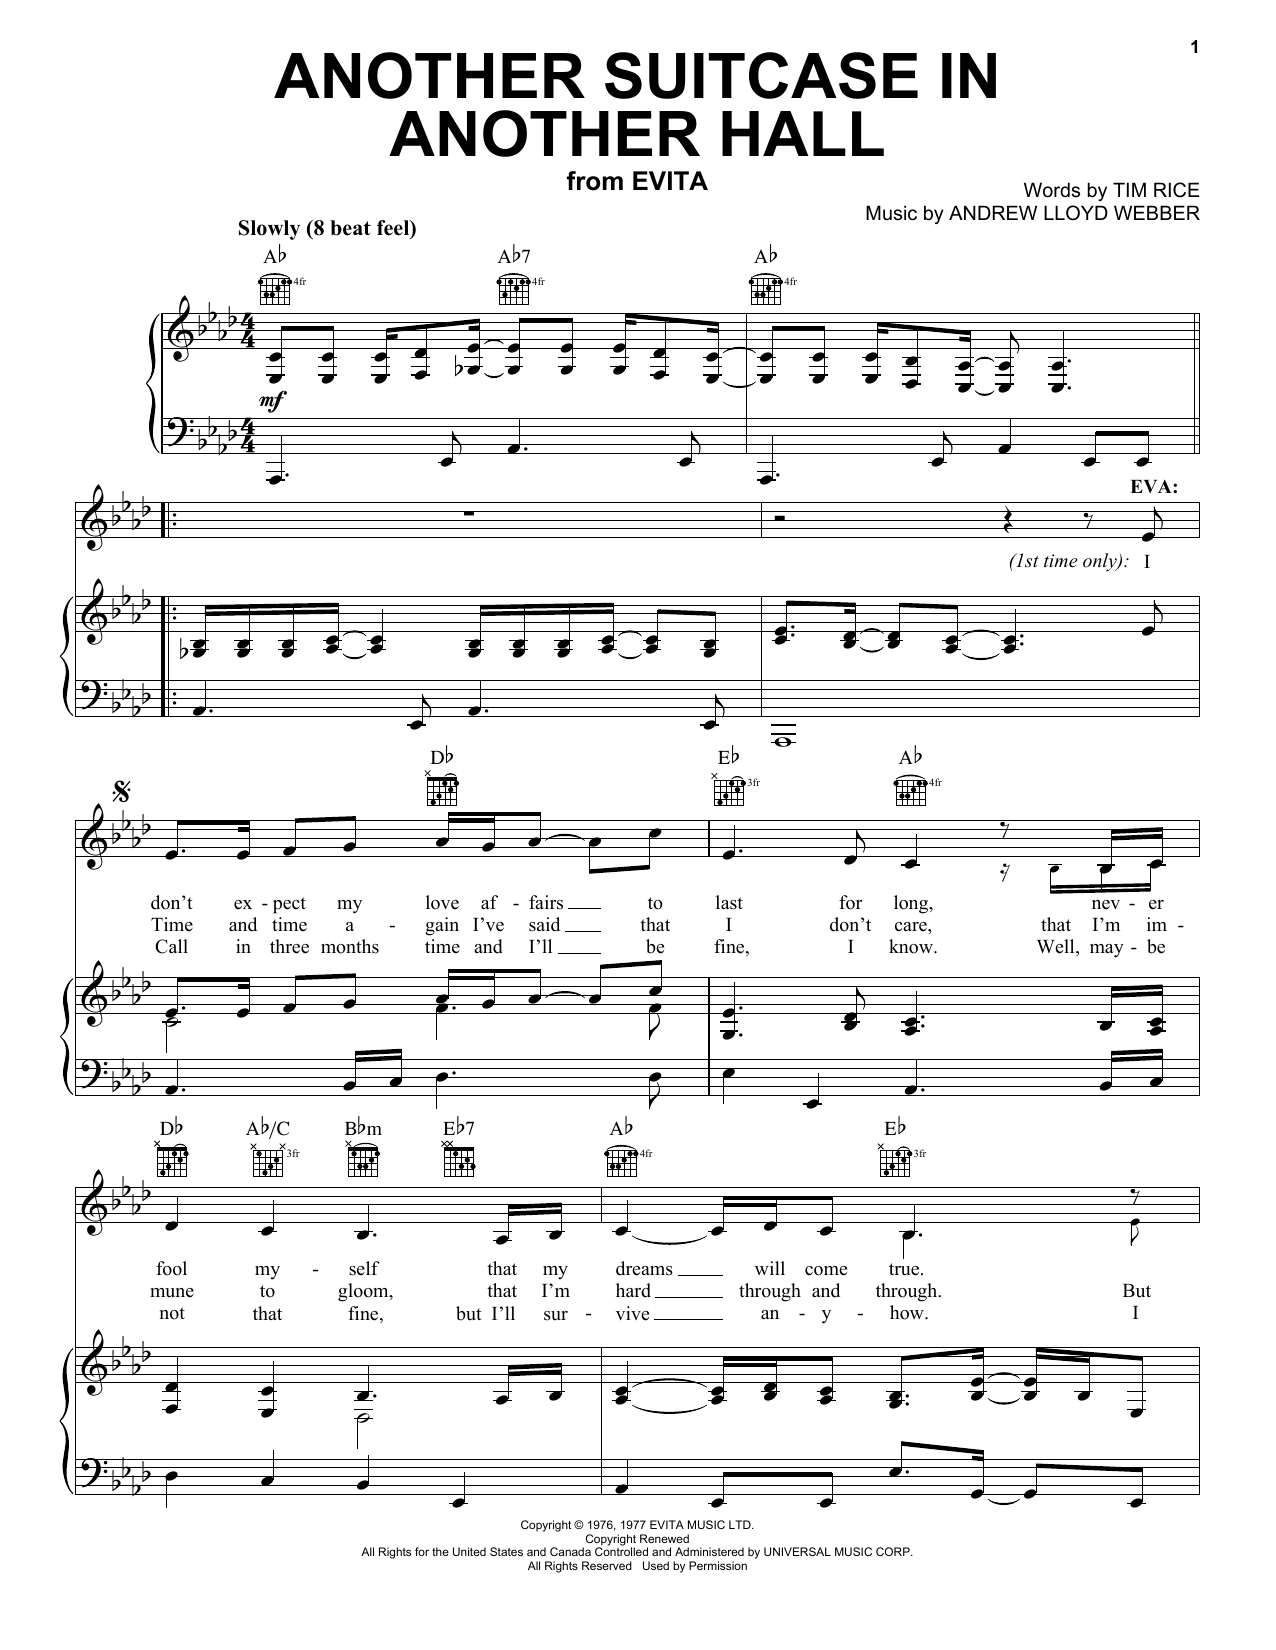 Andrew Lloyd Webber Another Suitcase In Another Hall sheet music notes and chords. Download Printable PDF.